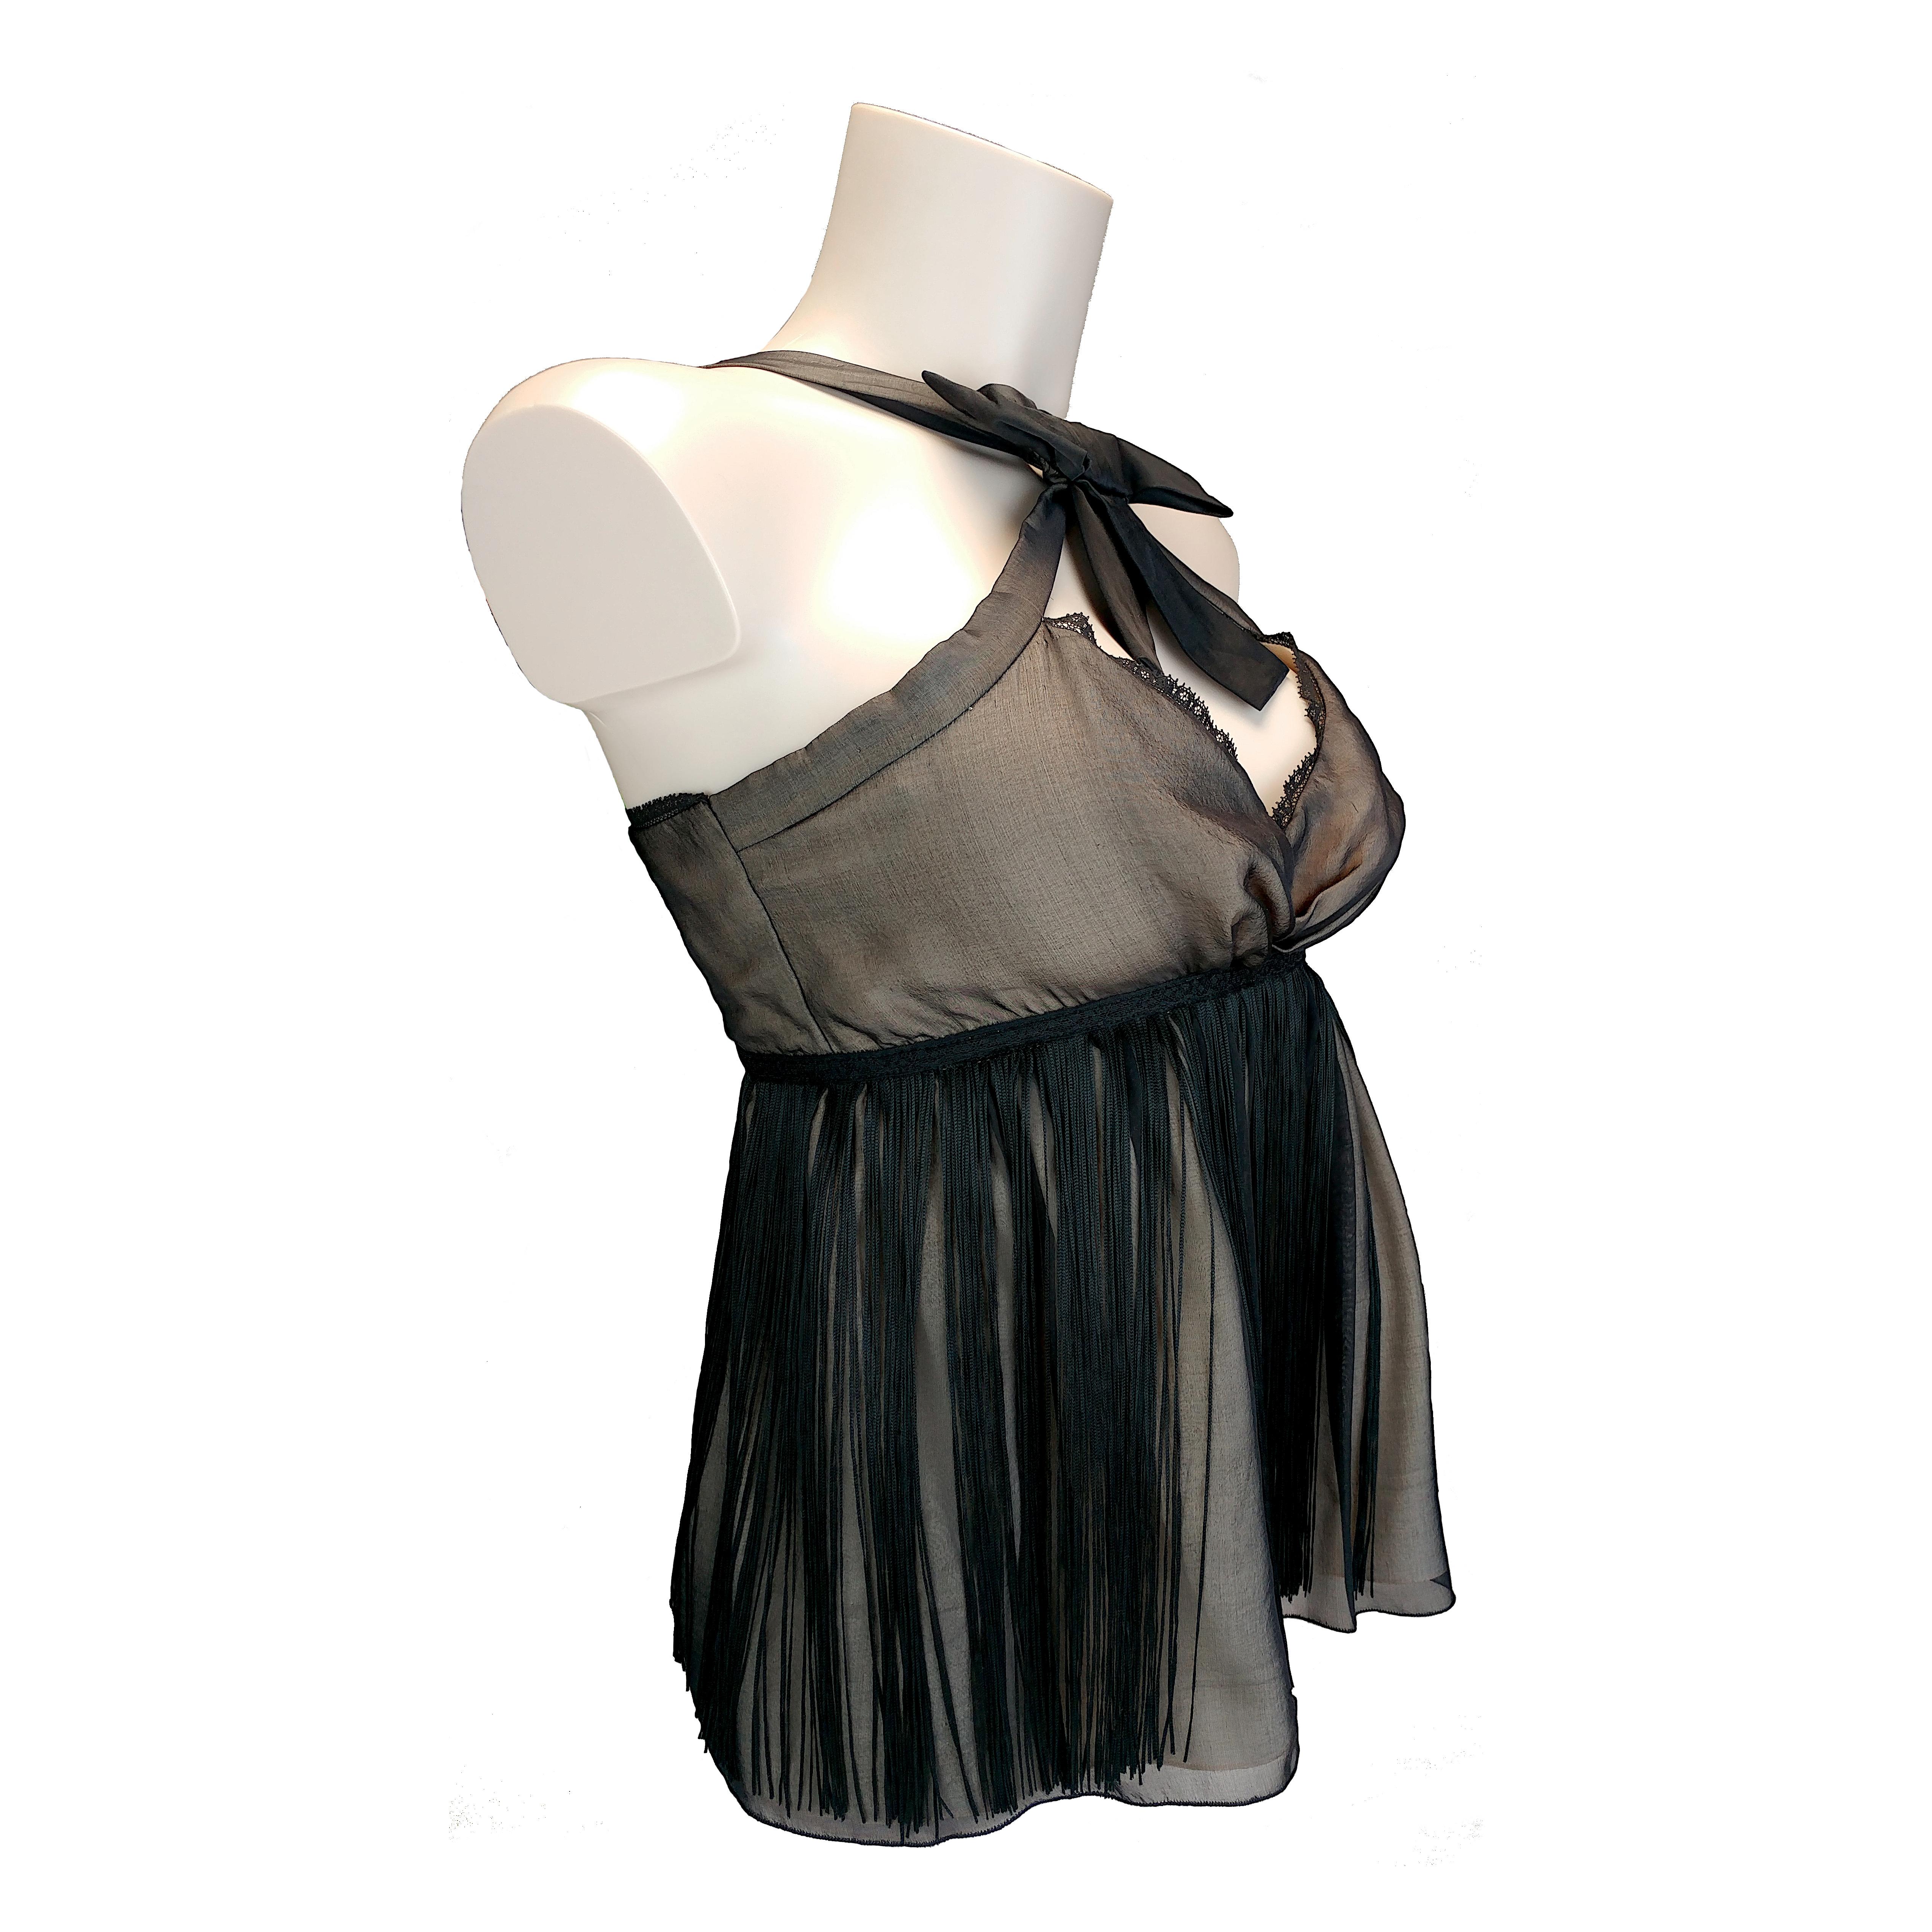 This is a fringed sleeveless top made of pure silk fabric from Dolce & Gabbana, labeled D&G. It is a new item never worn, still with its original price tag, seal and authenticity hologram. It features a rear zip closure and a bow standing on the